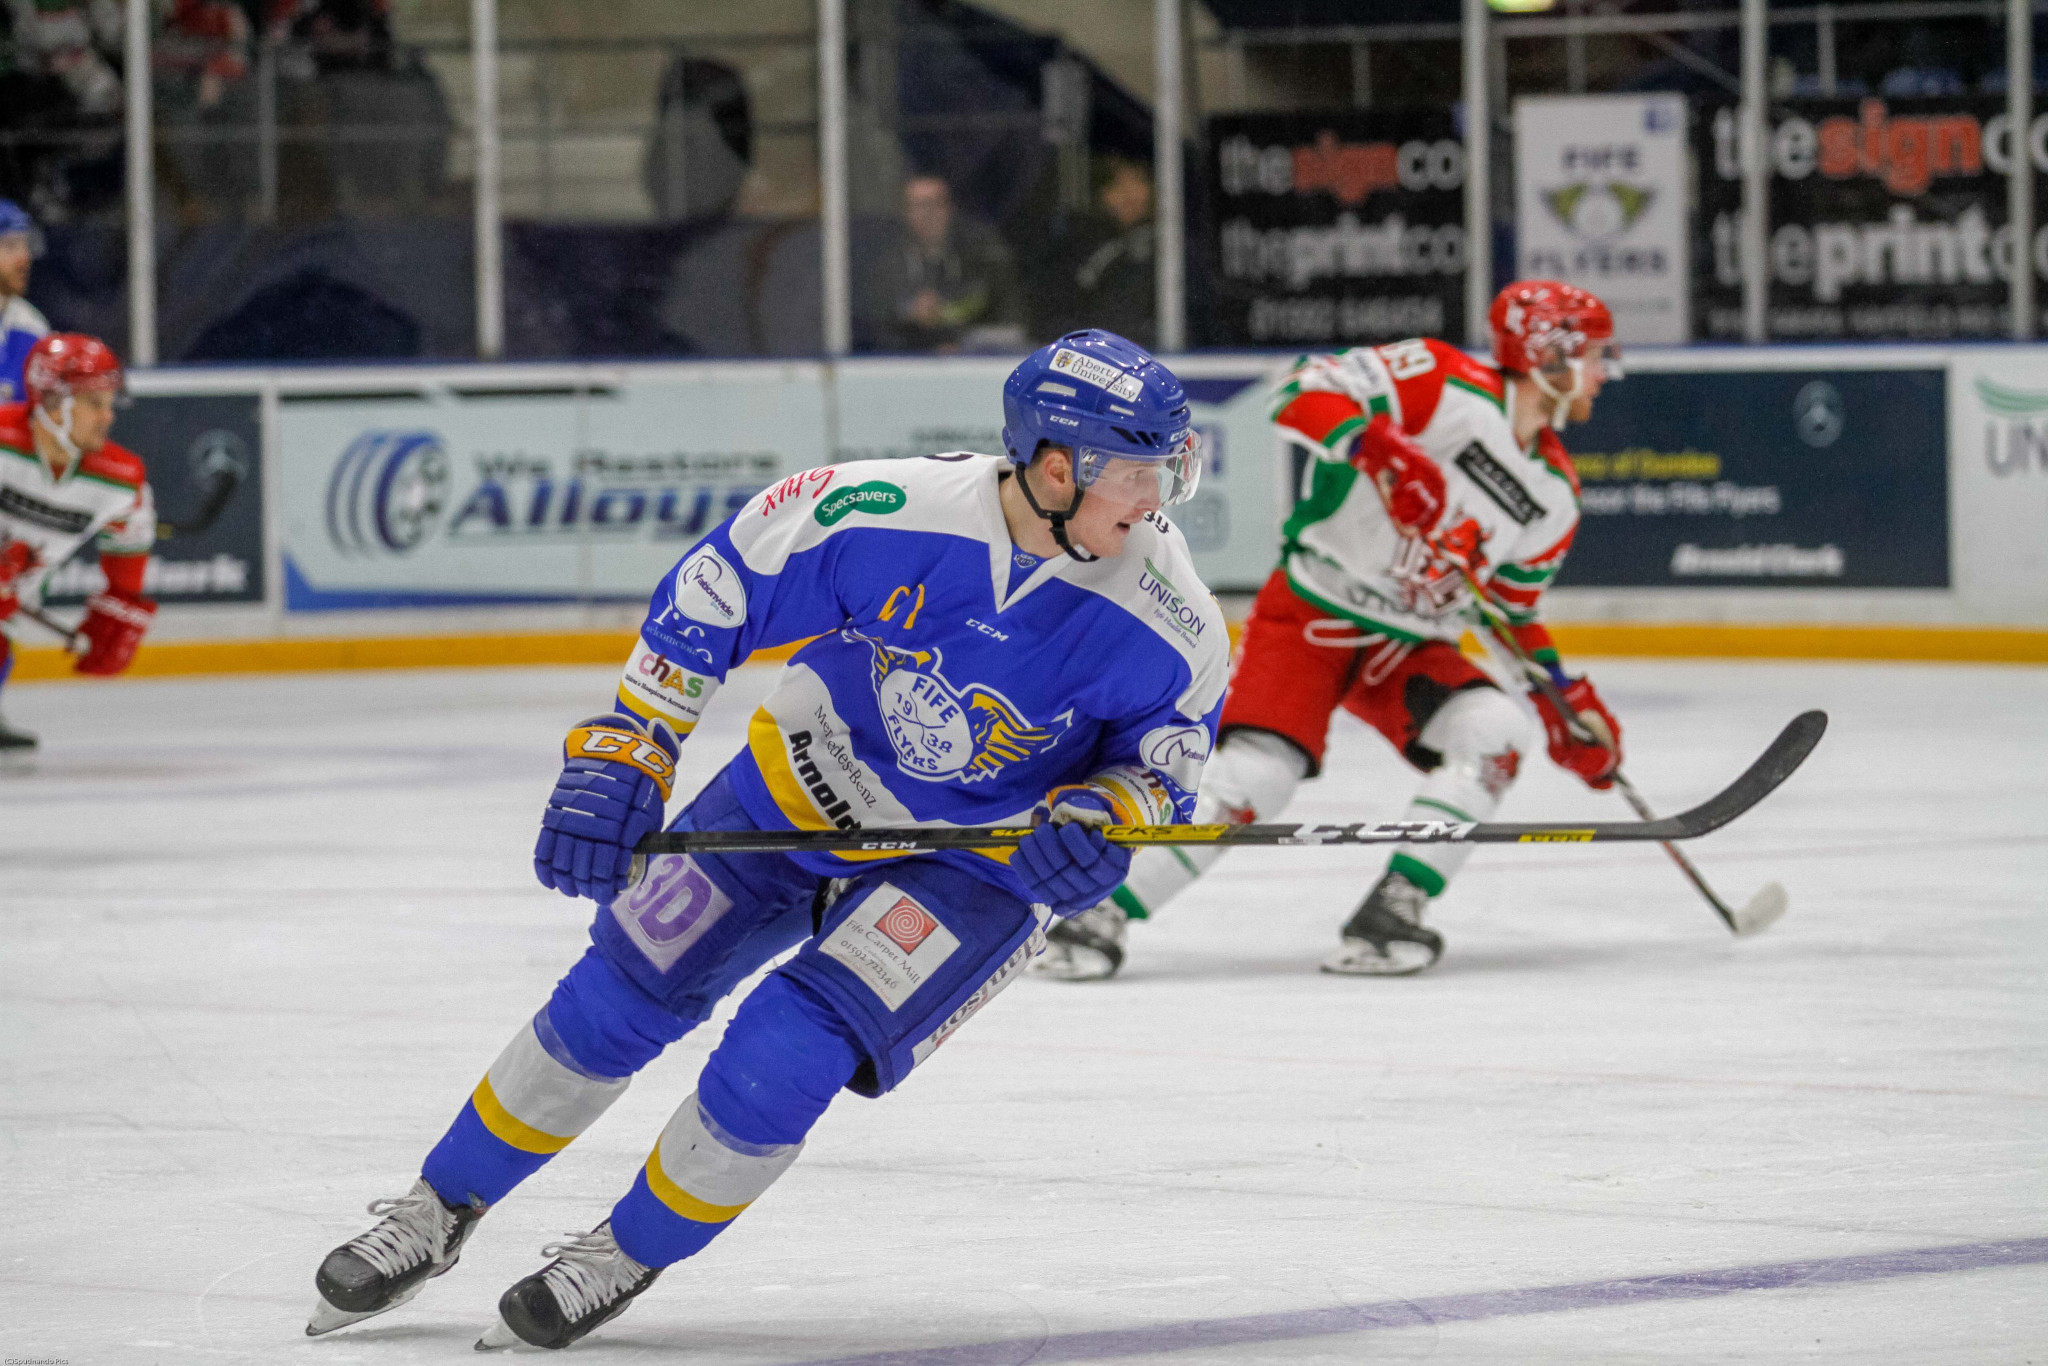 UK Government urged to give COVID-19 financial support to ice hockey